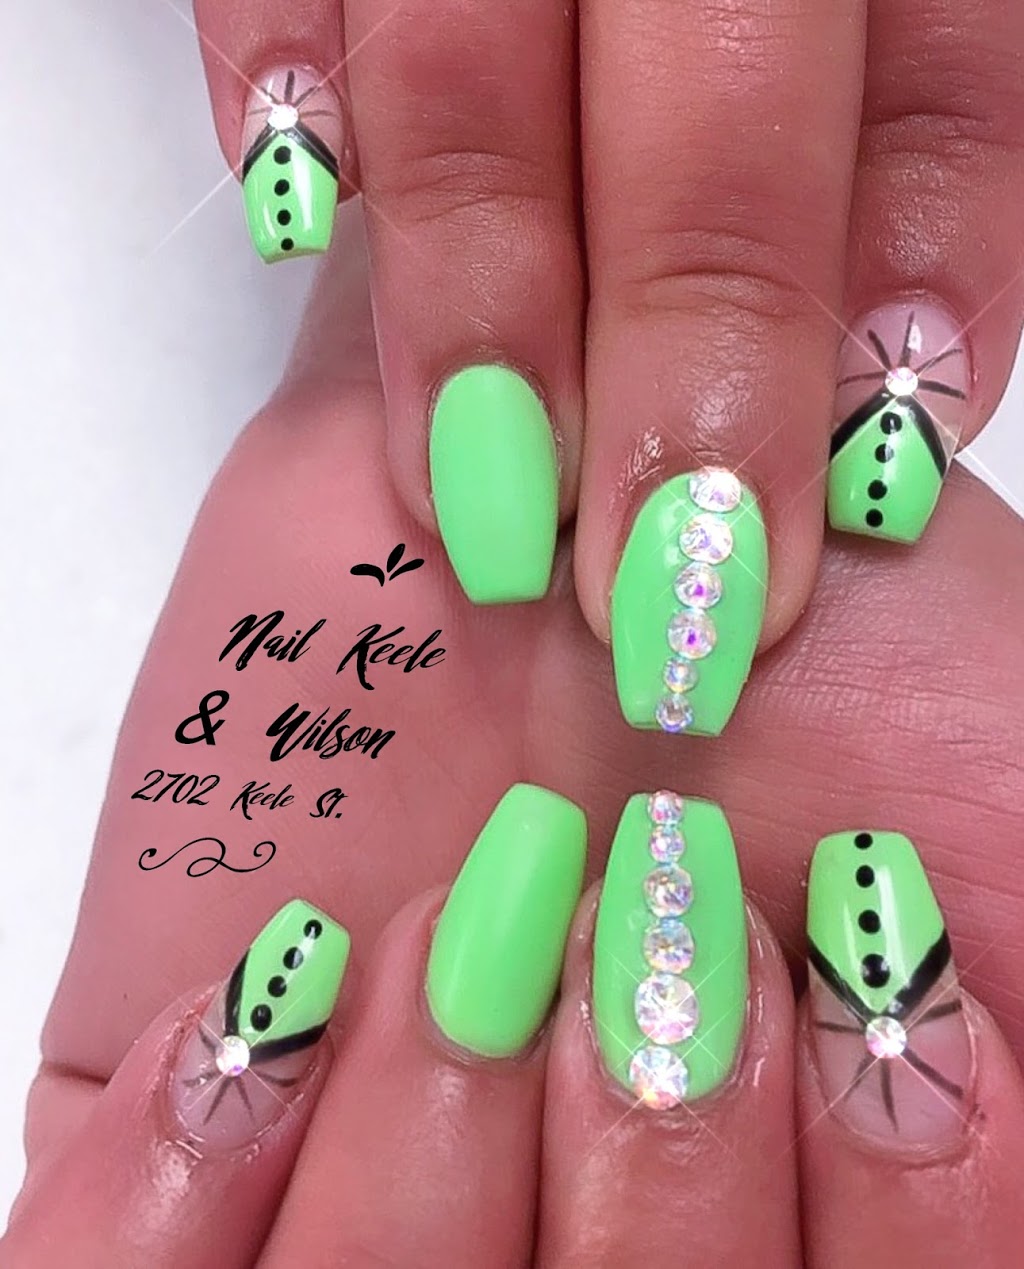 Nuvo Nails - Keele And Wilson | 2702 Keele St, North York, ON M3M 2G1, Canada | Phone: (416) 245-6926